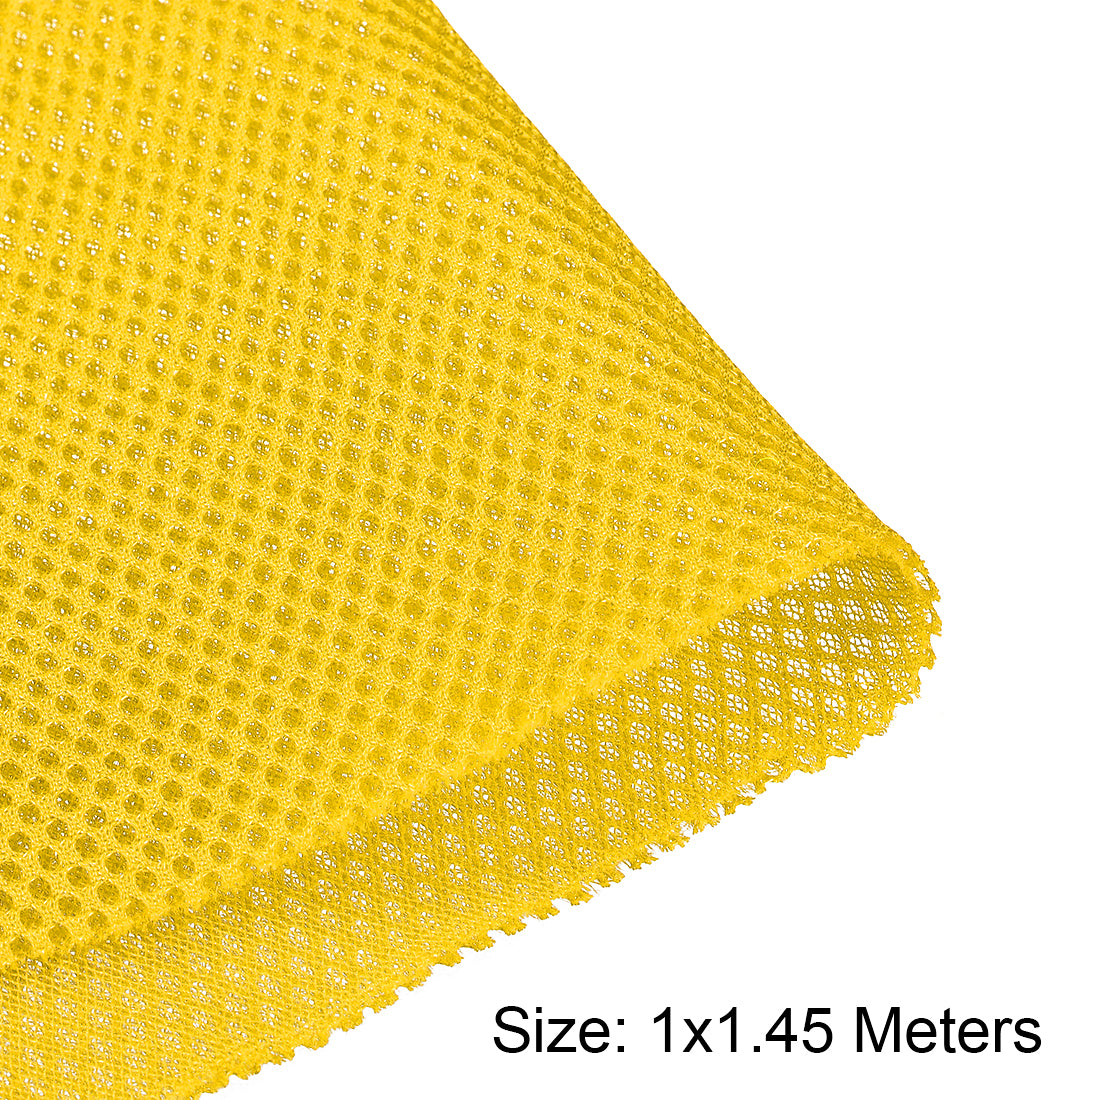 uxcell Uxcell Speaker Grill Cloth Polyester Fiber Stereo Mesh Fabric